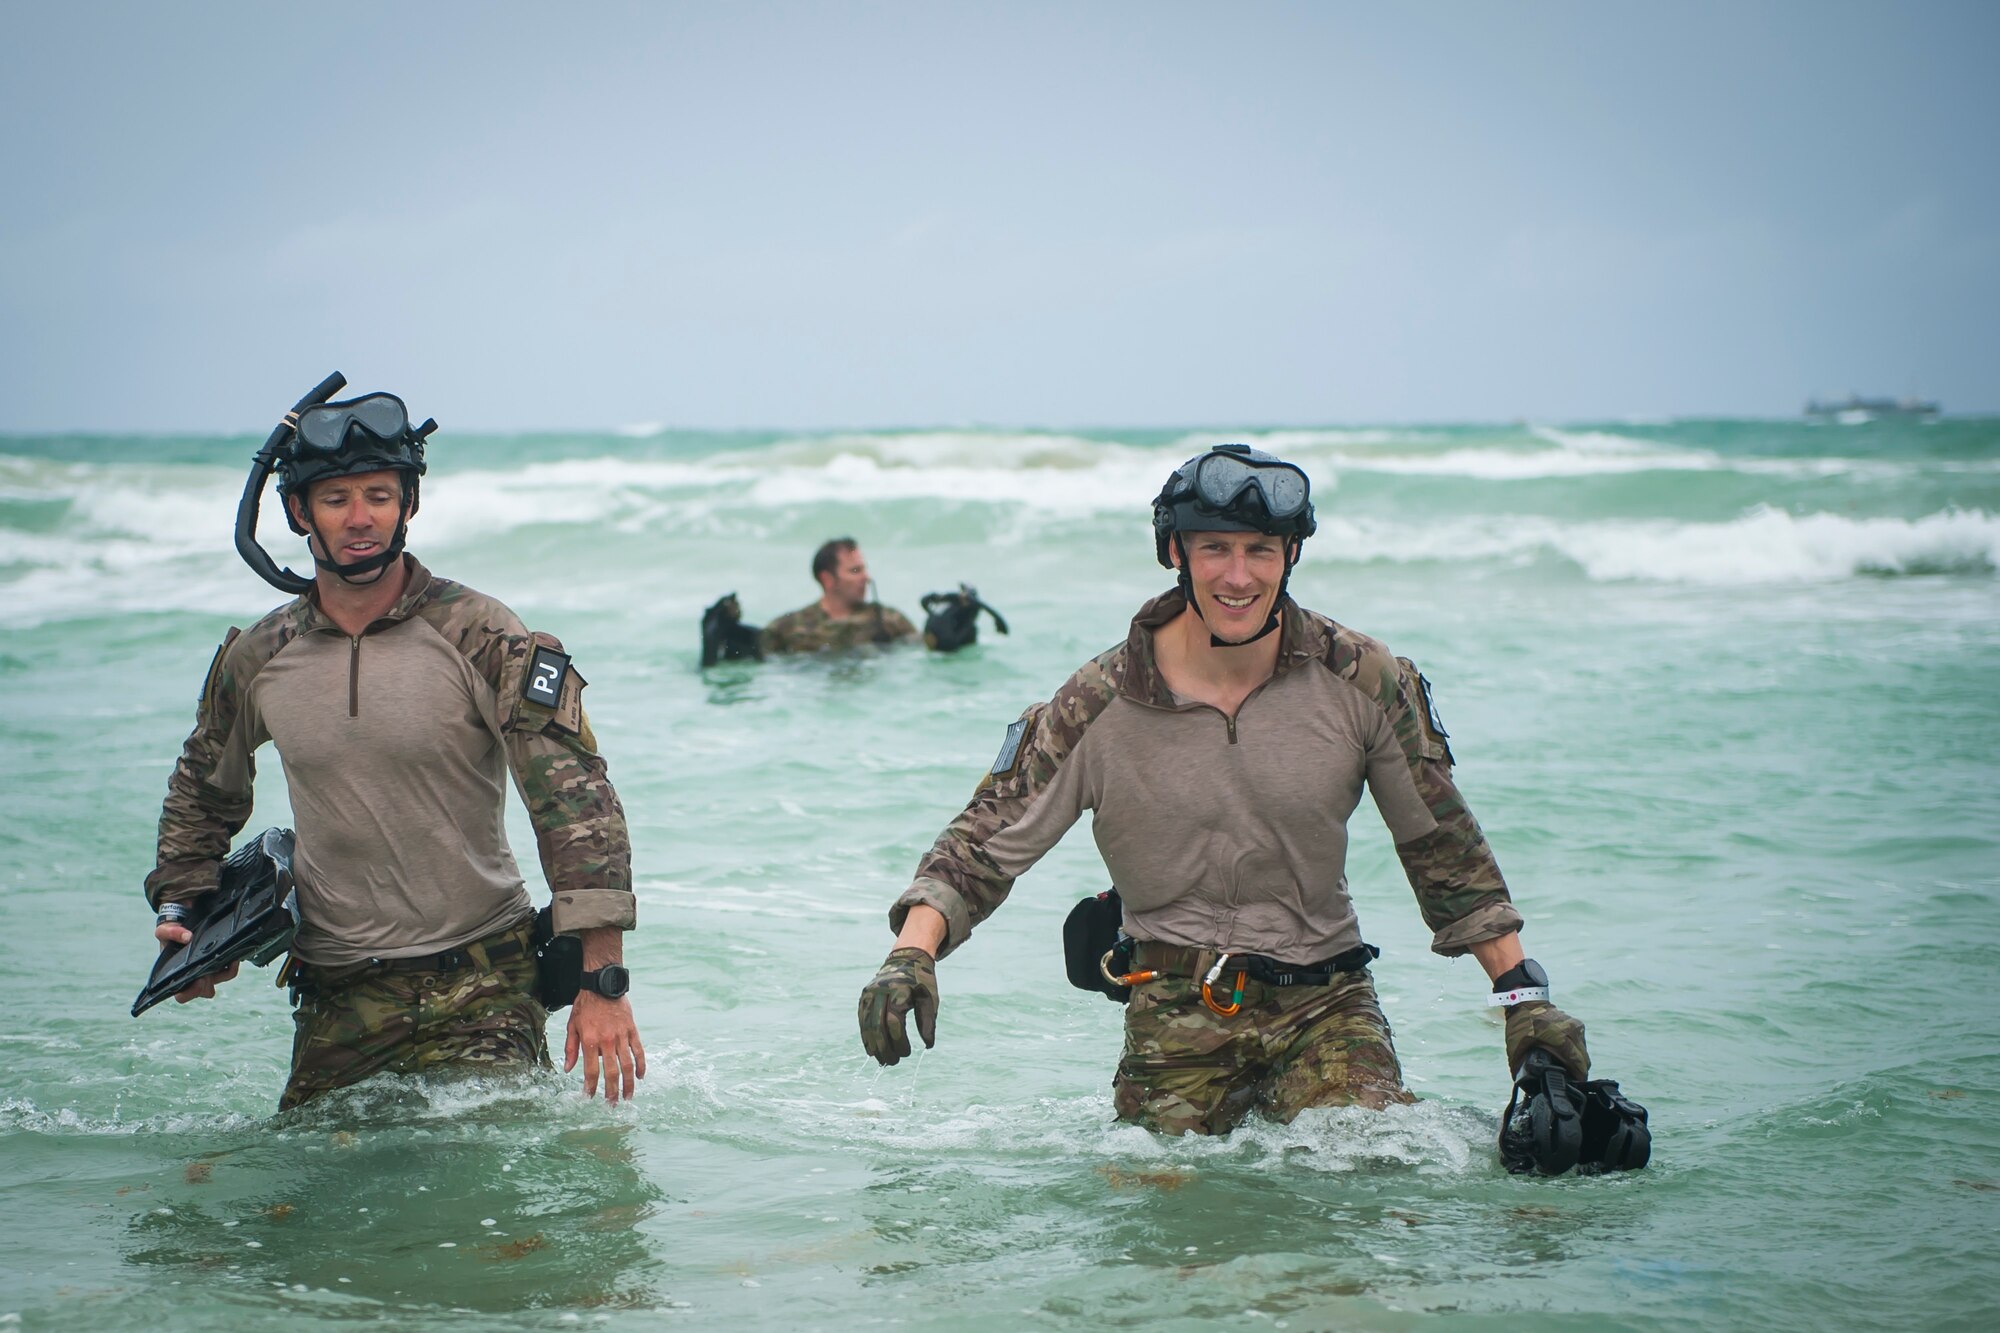 Air Force Reserve pararescuemen from the 920th Rescue Wing walk ashore after jumping out of a helicopter on May 26th, 2018 during the 2nd annual Salute to American Heroes Air and Sea Show, in Miami Beach. This two-day event showcases military fighter jets and other aircraft and equipment from all branches of the United States military in observance of Memorial Day, honoring servicemembers who have made the ultimate sacrifice. (U.S. Air Force photo/Staff Sgt. Jared Trimarchi)